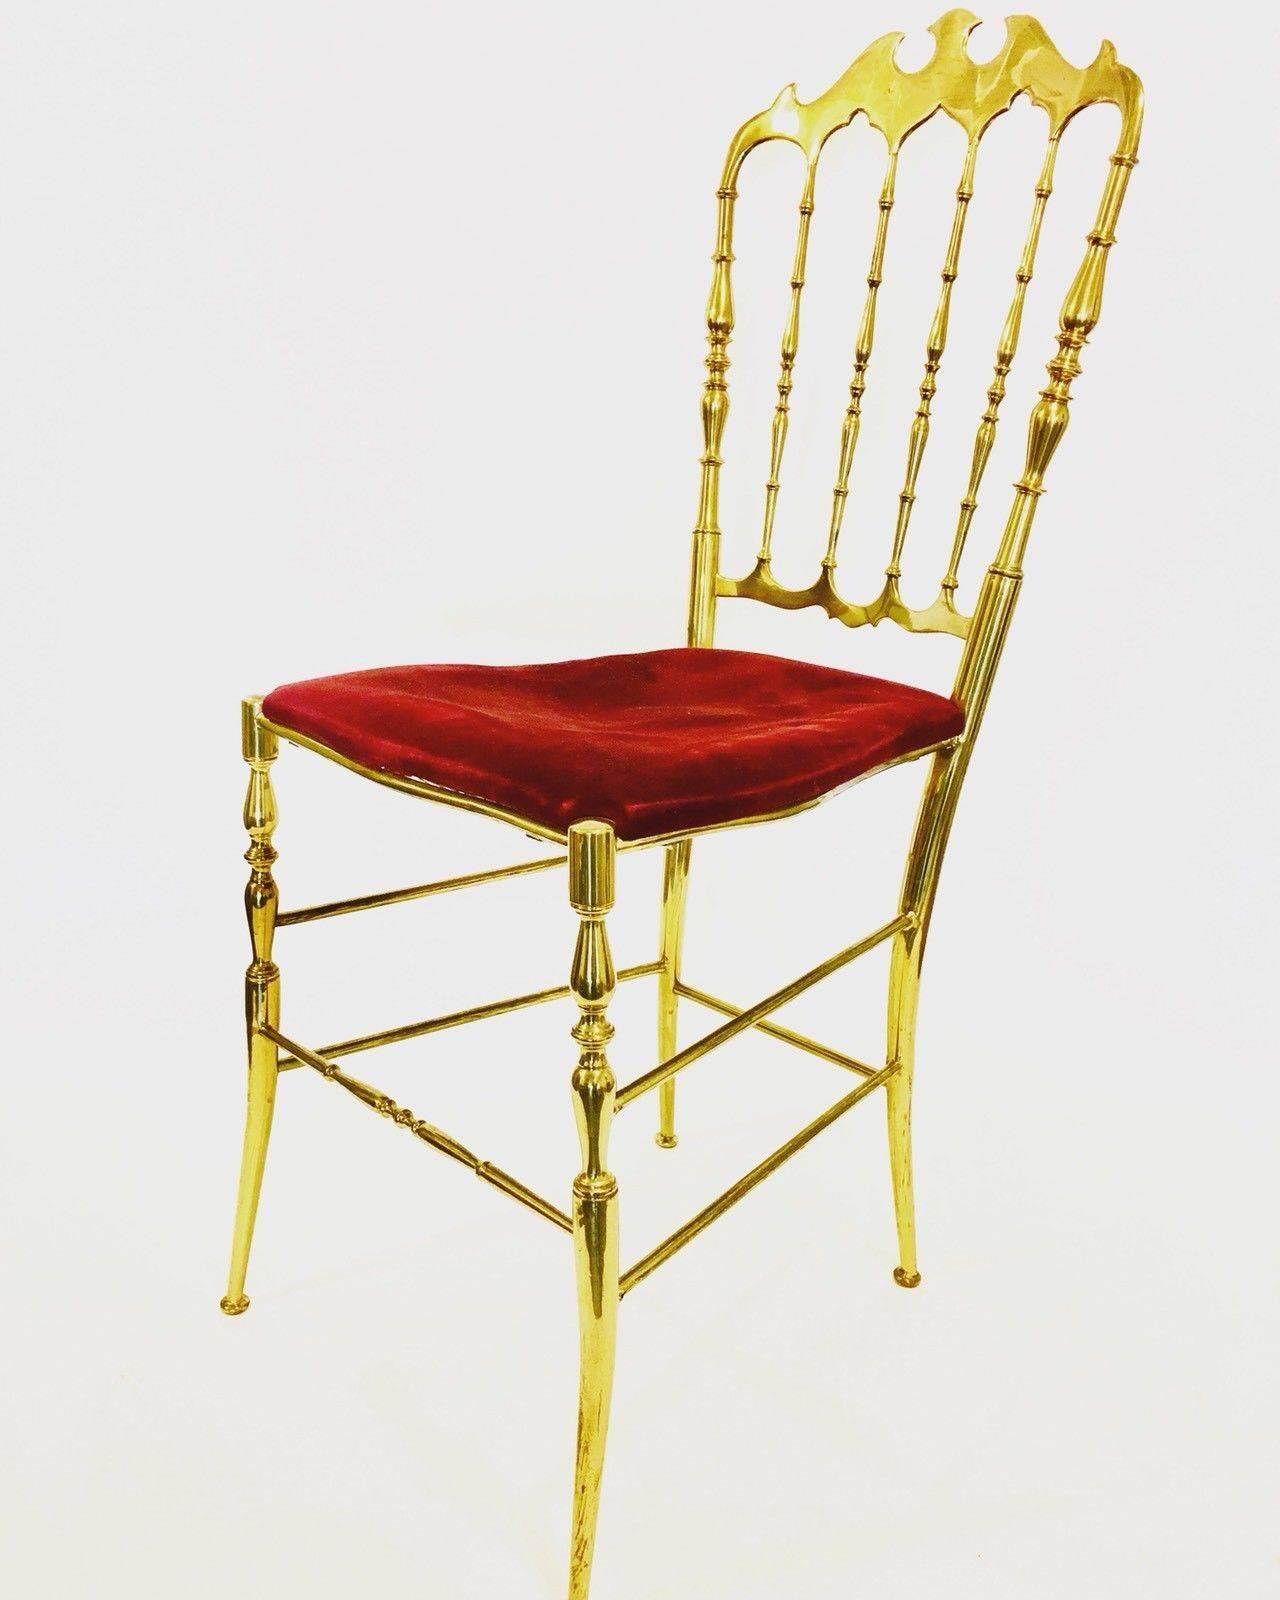 Solid polished brass Chiavari opera chair with daintily splayed feet. First designed by Giuseppe Gaetano Descalzi and continuously produced since the early 19th century in the Ligurian town of Chiavari. This solid brass version, made in Italy in the